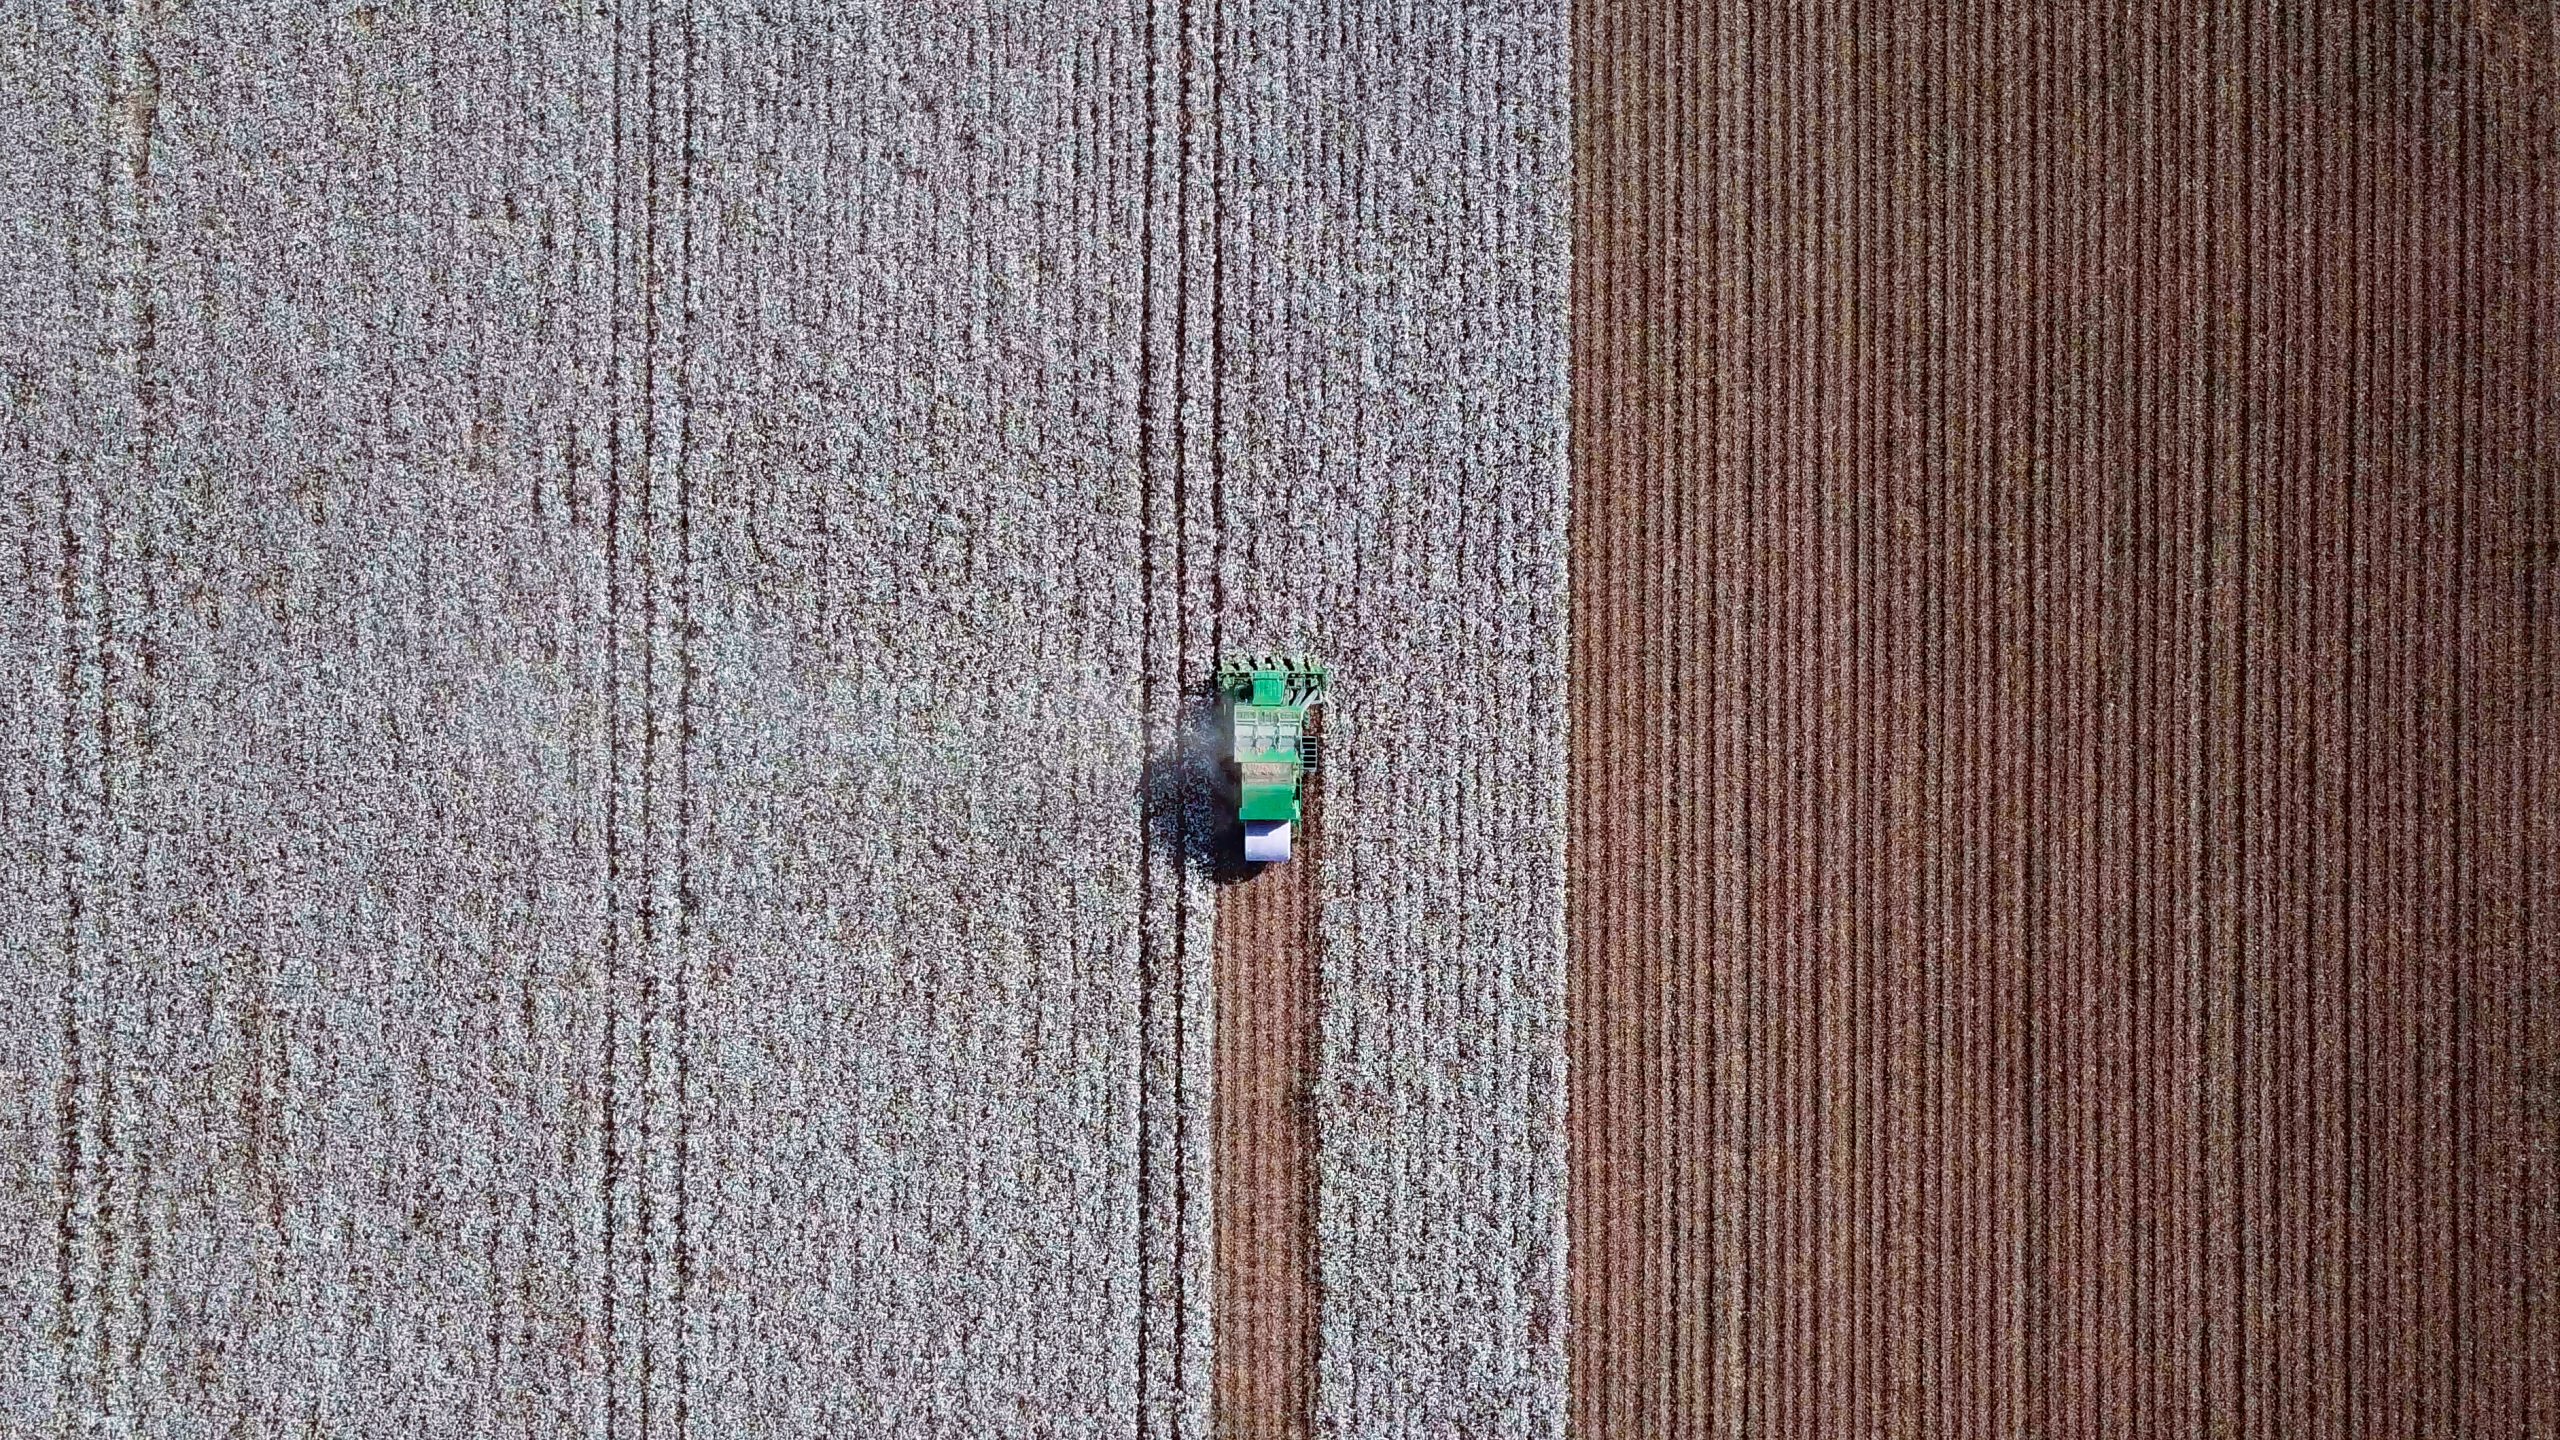 Aerial view of a Large green Cotton picker working in a field. (Photo: iStock - liorpt)